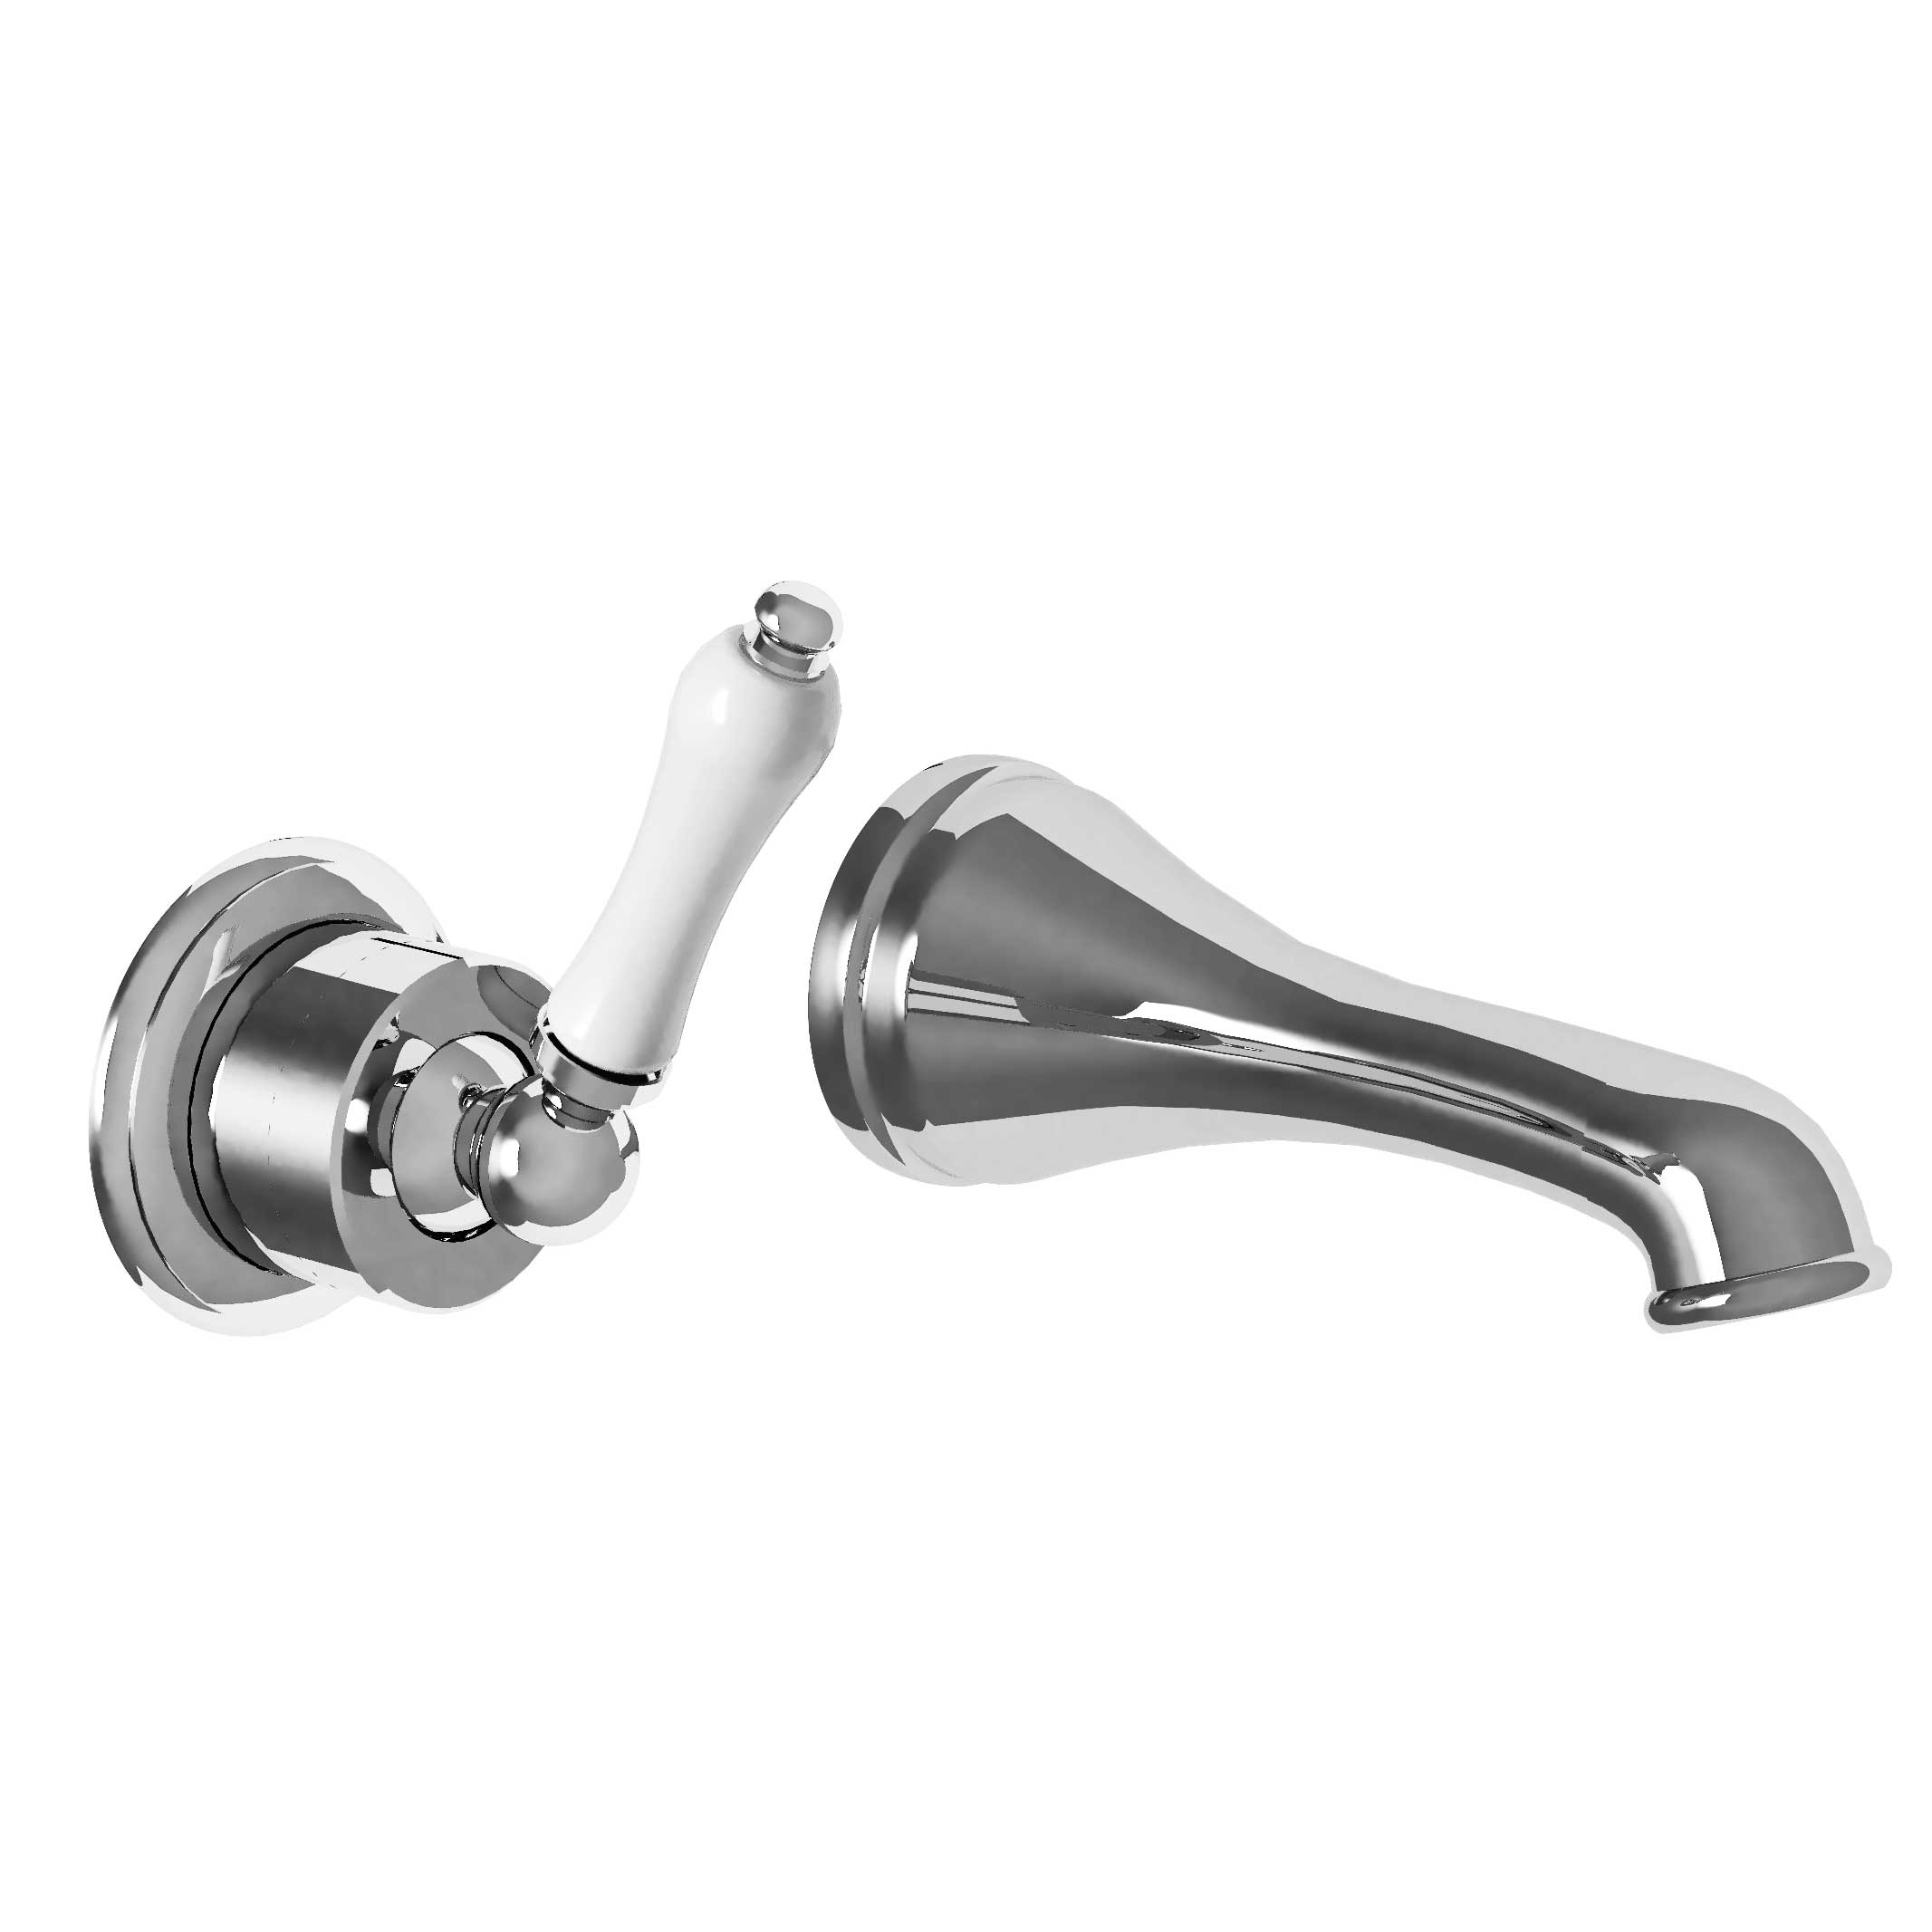 M40-1203M Wall mounted single lever basin mixer, built-in